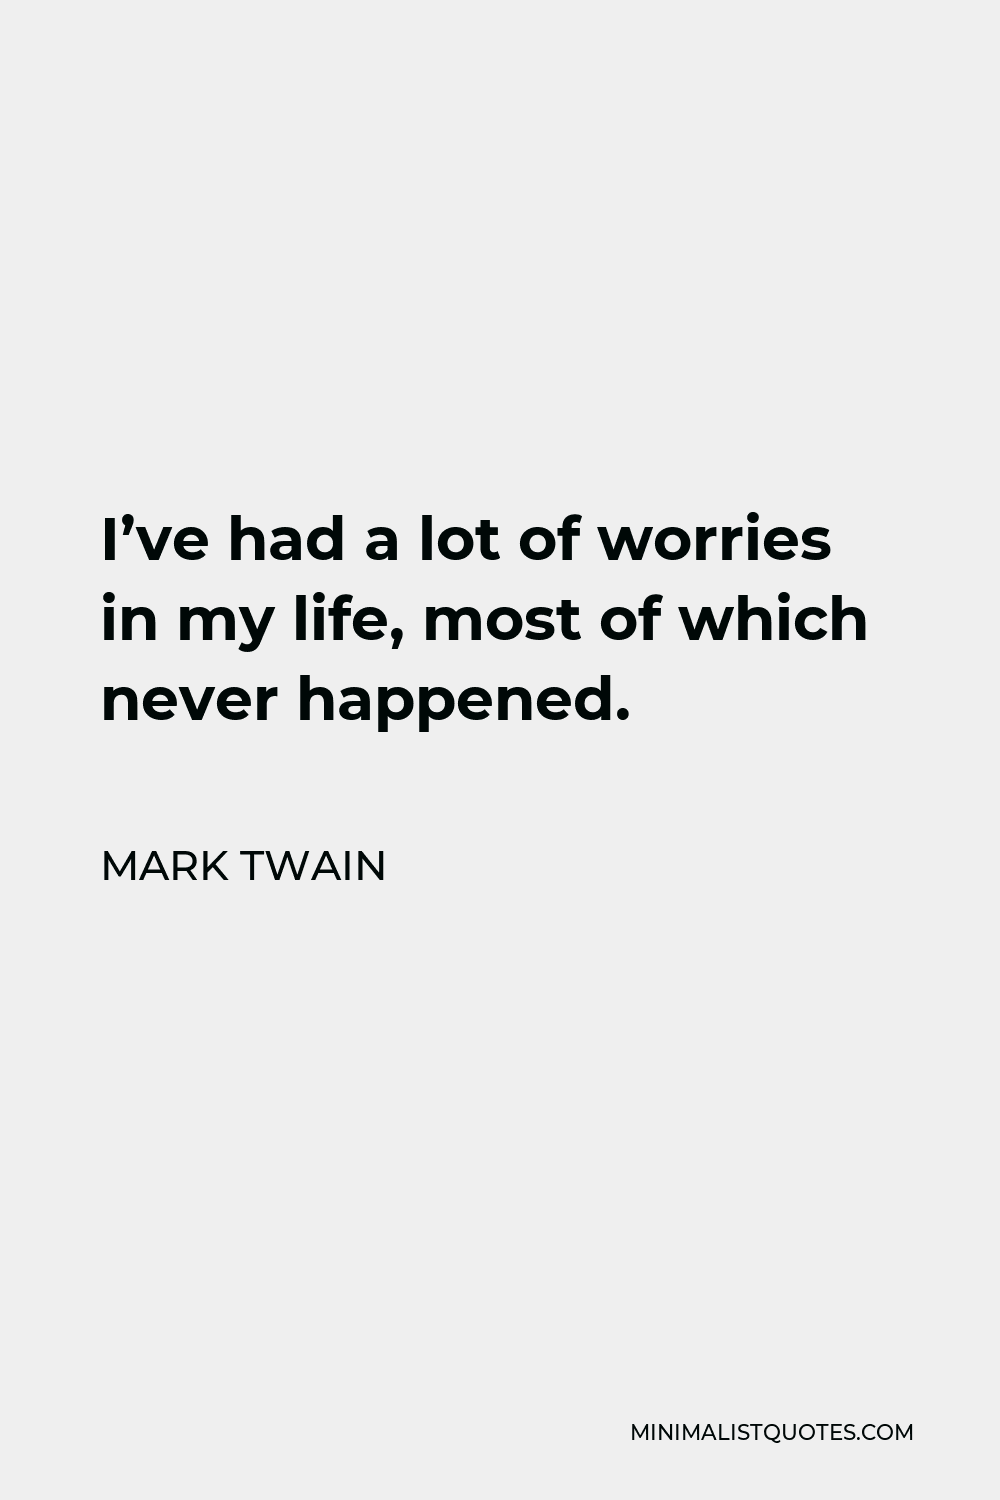 Mark Twain Quote - I’ve had a lot of worries in my life, most of which never happened.